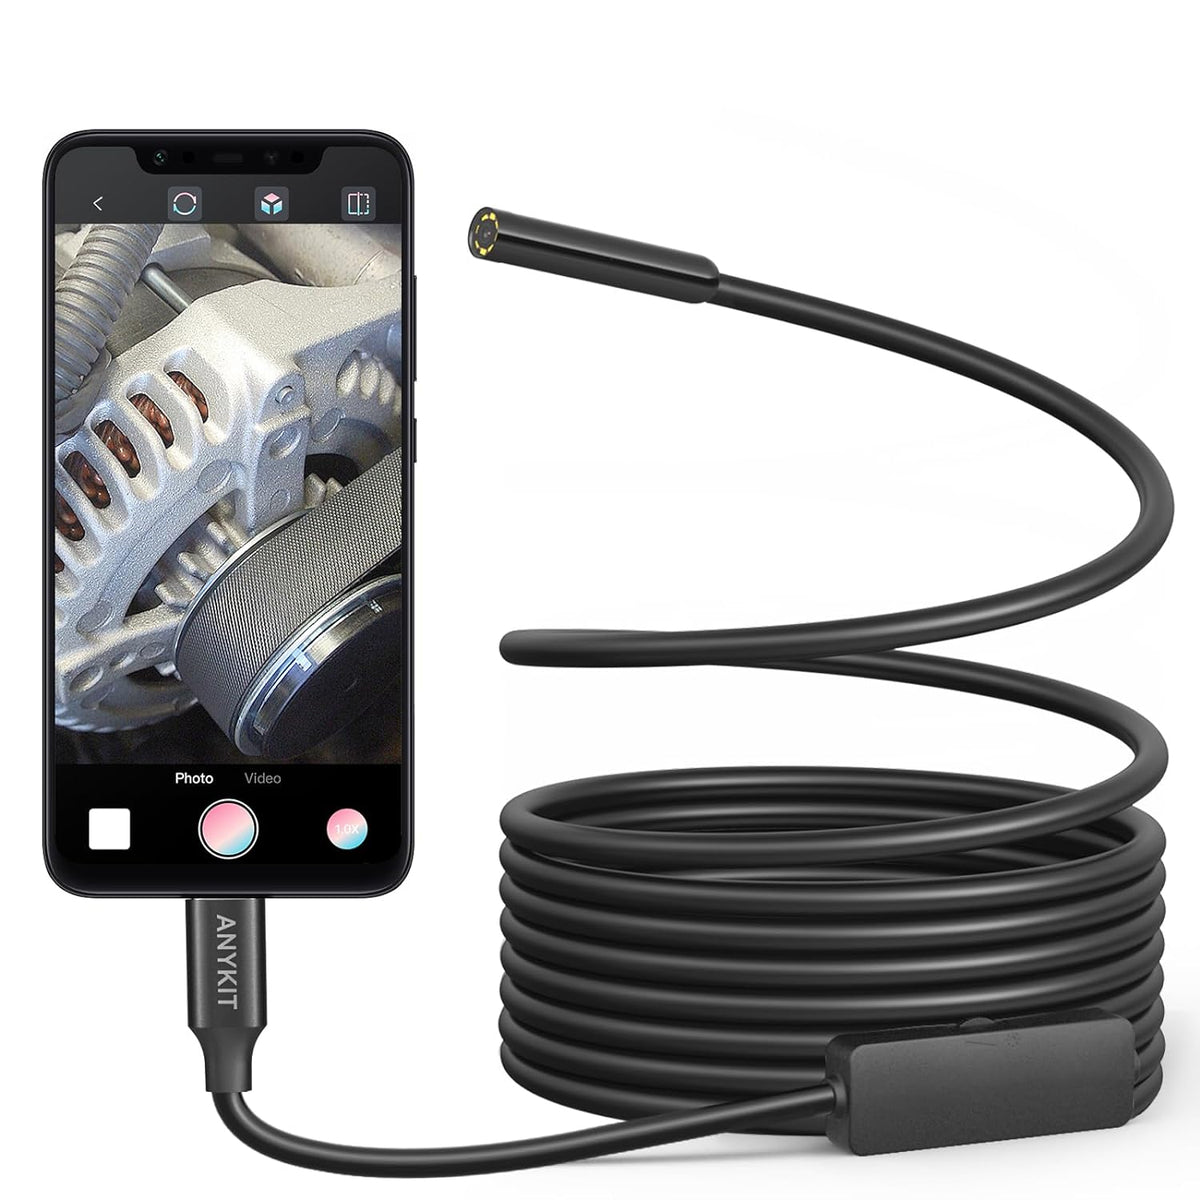 Endoscope Camera with Light, Anykit Borescope with 8 Adjustable LED Lights, Endoscope with 10ft Semi-Rigid Snake Camera, IP67 Waterproof USB Inspection Camera for iOS, OTG Android Phone